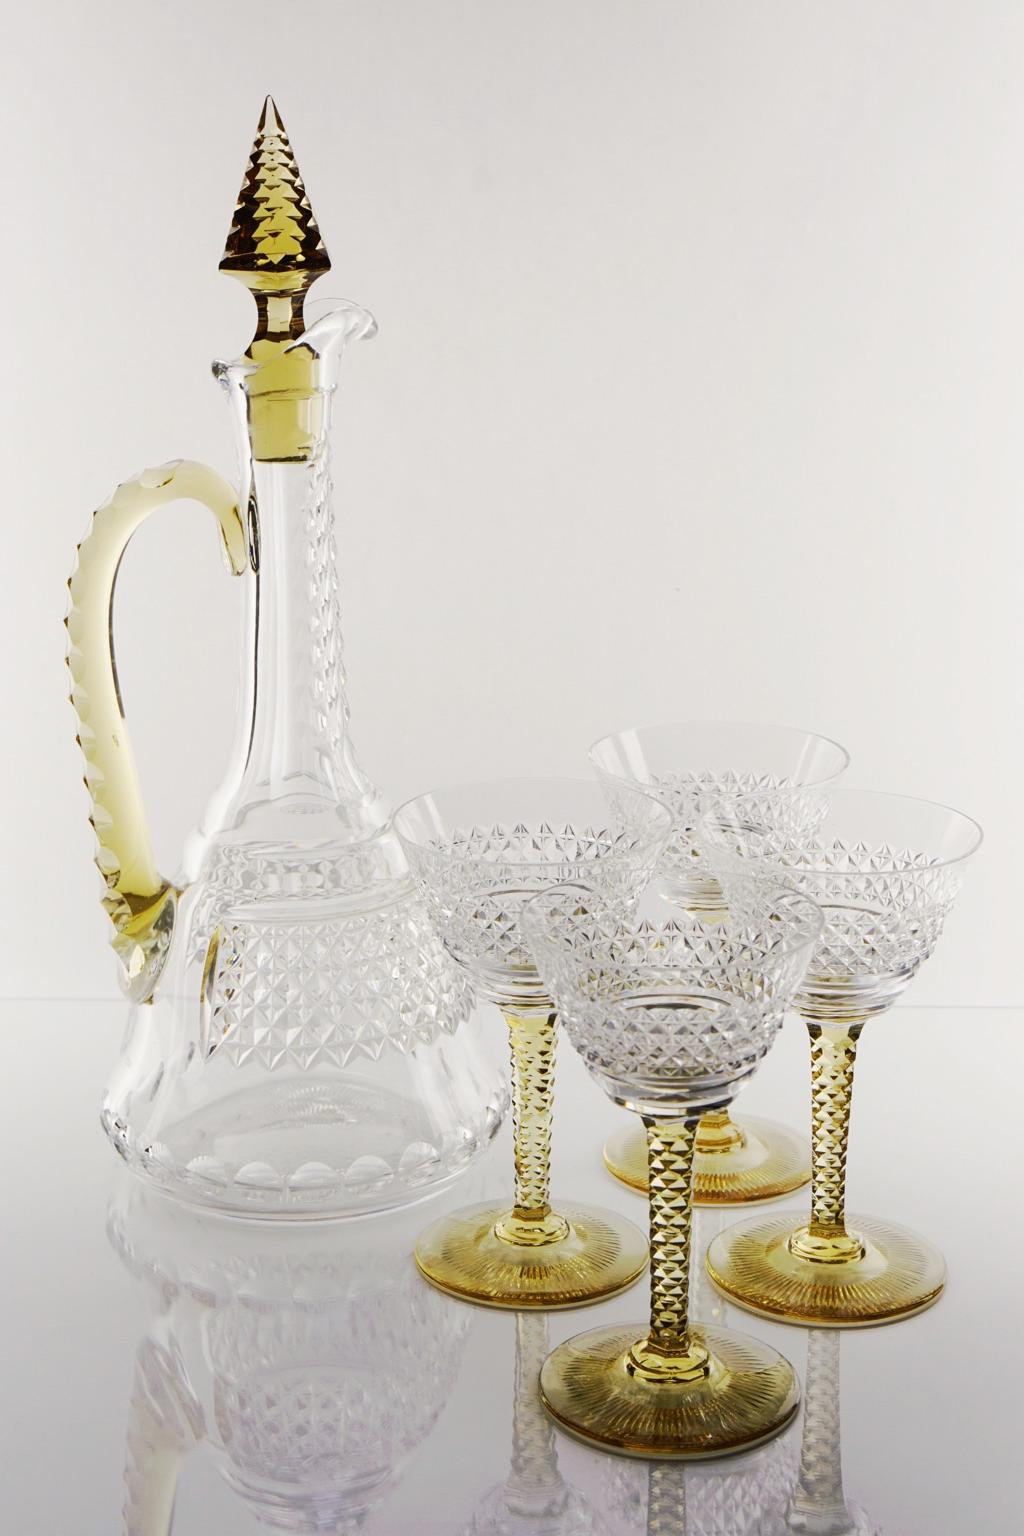 Art Deco Crystal Topaz and White Liquor Service Decanter and Glasses For Sale 6